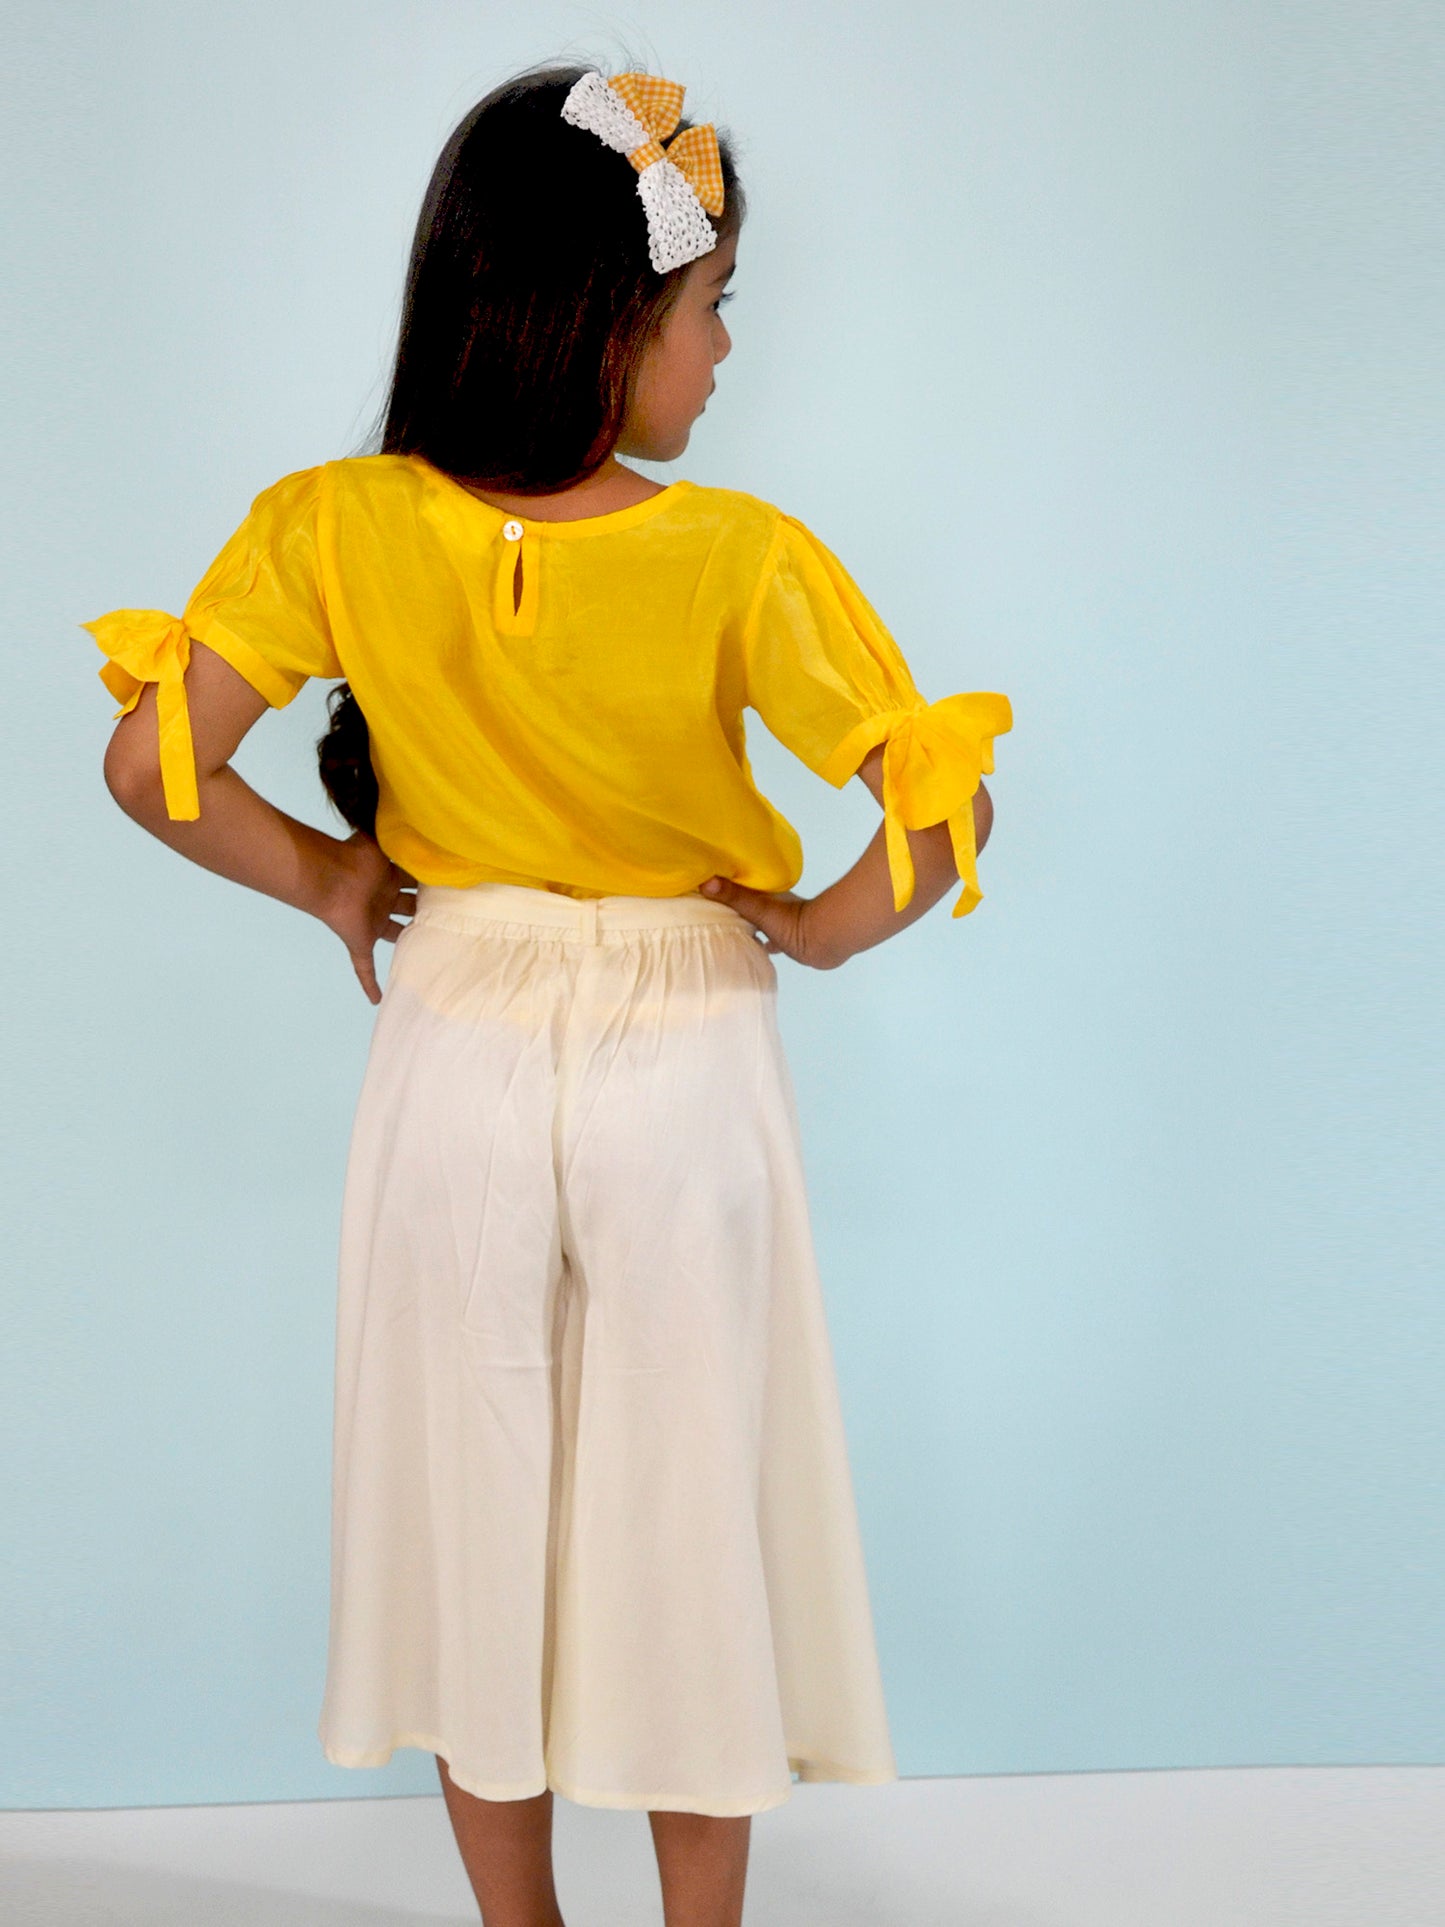 Gardinia Flared cotton culottes pants with tie up belt - White